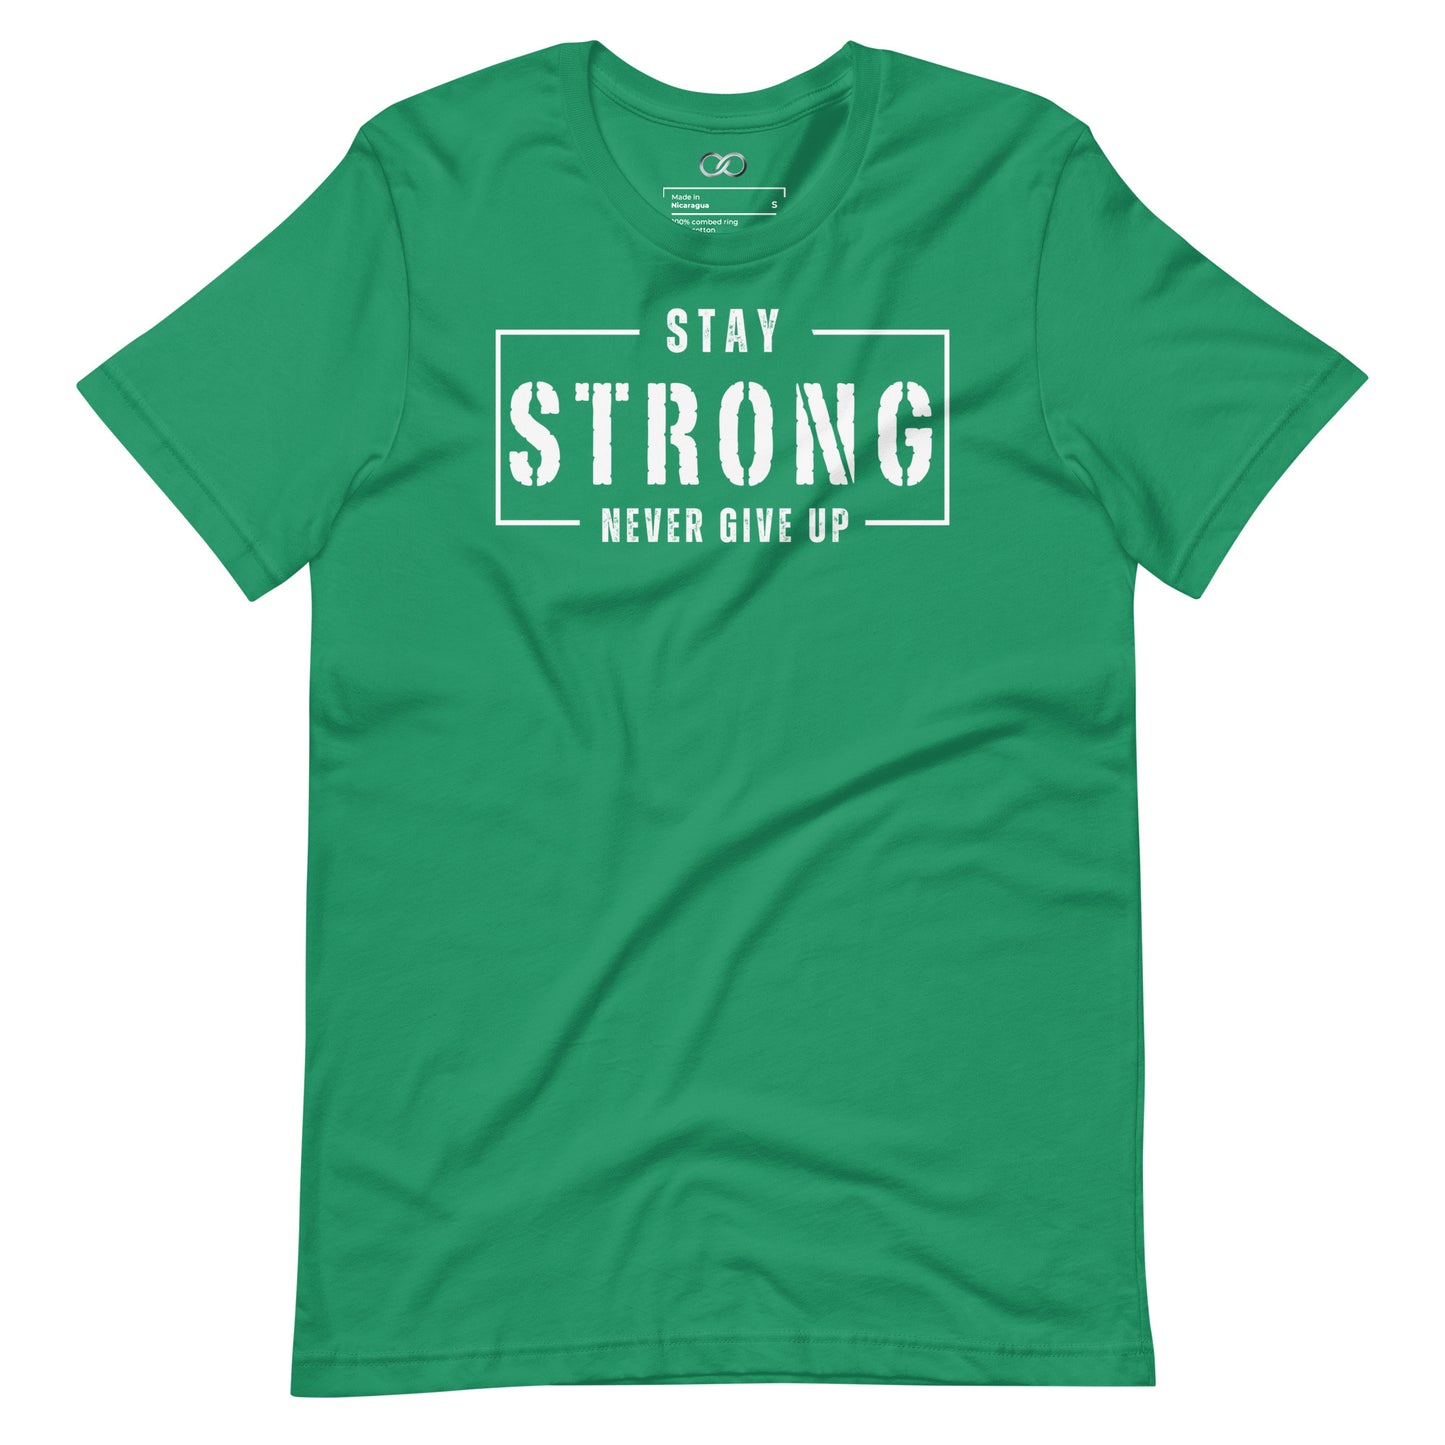 Stay Strong T-Shirt - Motivational Typographic Tee